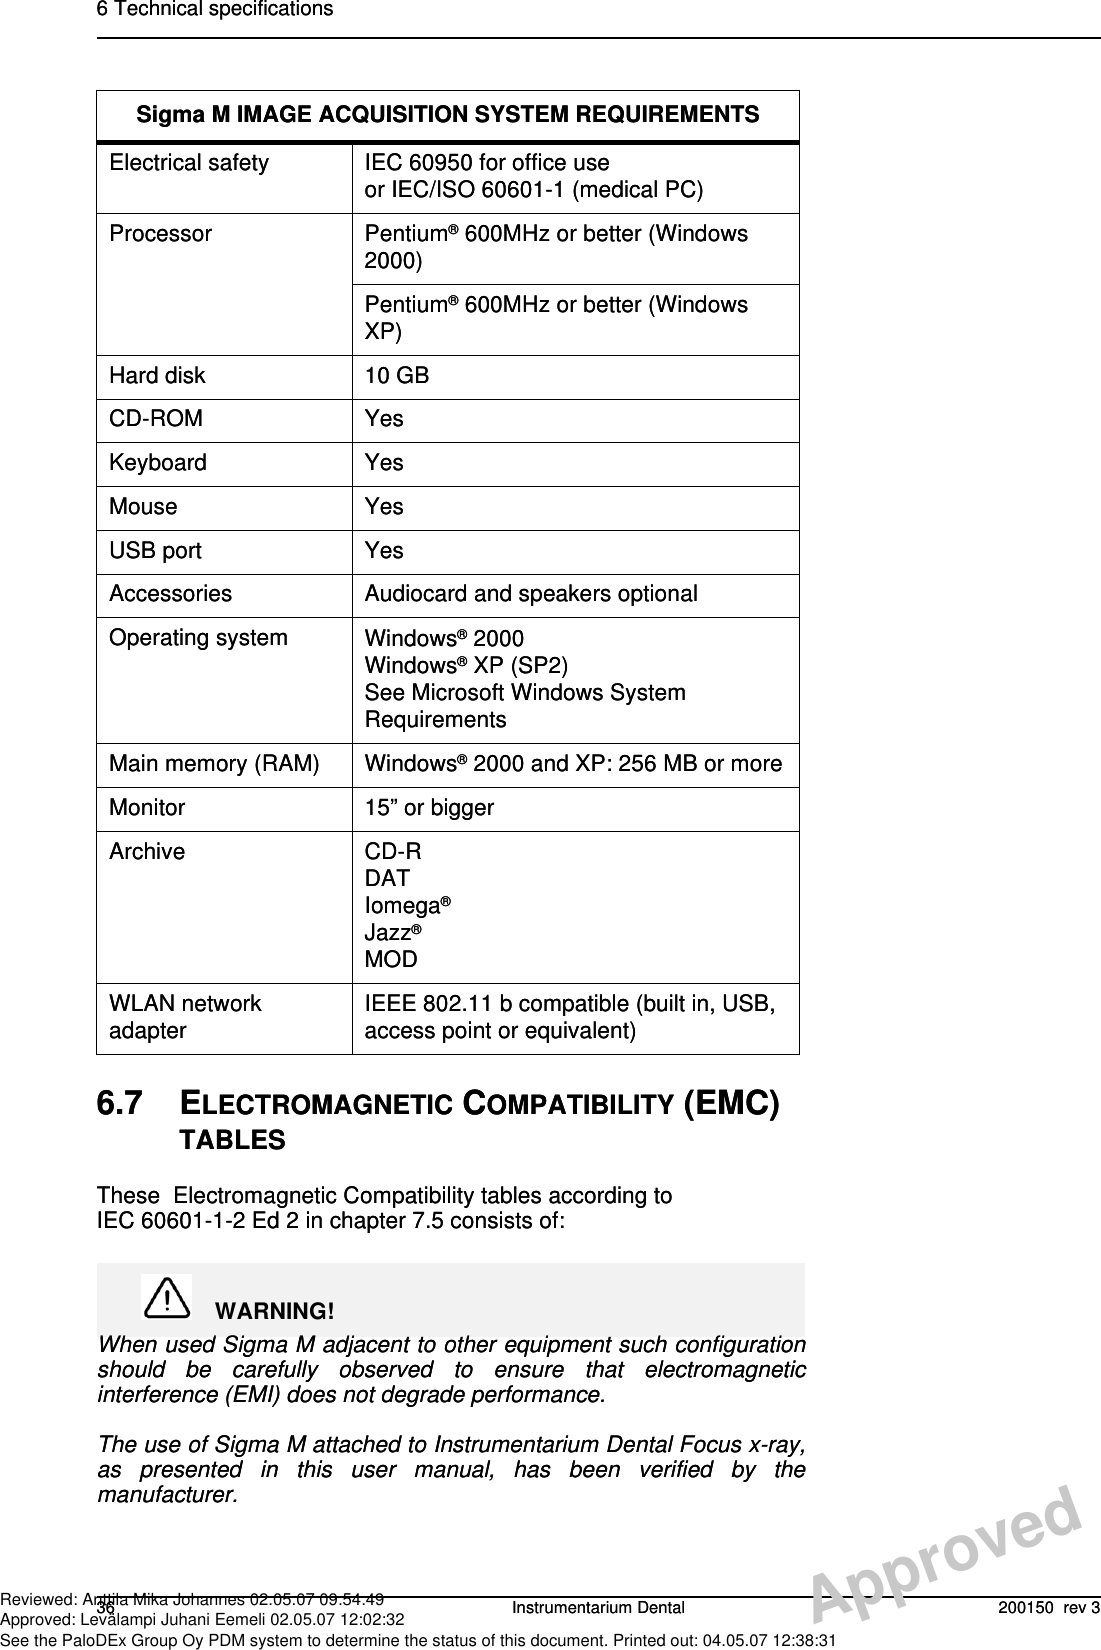 6 Technical specifications36 Instrumentarium Dental 200150  rev 36.7 ELECTROMAGNETIC COMPATIBILITY (EMC) TABLESThese  Electromagnetic Compatibility tables according toIEC 60601-1-2 Ed 2 in chapter 7.5 consists of:WARNING!When used Sigma M adjacent to other equipment such configurationshould be carefully observed to ensure that electromagneticinterference (EMI) does not degrade performance. The use of Sigma M attached to Instrumentarium Dental Focus x-ray,as presented in this user manual, has been verified by themanufacturer.Sigma M IMAGE ACQUISITION SYSTEM REQUIREMENTSElectrical safety IEC 60950 for office useor IEC/ISO 60601-1 (medical PC)Processor Pentium® 600MHz or better (Windows 2000)Pentium® 600MHz or better (Windows XP)Hard disk 10 GBCD-ROM YesKeyboard YesMouse YesUSB port YesAccessories Audiocard and speakers optionalOperating system Windows® 2000Windows® XP (SP2)See Microsoft Windows System RequirementsMain memory (RAM) Windows® 2000 and XP: 256 MB or moreMonitor 15” or biggerArchive CD-RDATIomega®Jazz®MODWLAN network adapter IEEE 802.11 b compatible (built in, USB, access point or equivalent)6 Technical specifications36 Instrumentarium Dental 200150  rev 36.7 ELECTROMAGNETIC COMPATIBILITY (EMC) TABLESThese  Electromagnetic Compatibility tables according toIEC 60601-1-2 Ed 2 in chapter 7.5 consists of:WARNING!When used Sigma M adjacent to other equipment such configurationshould be carefully observed to ensure that electromagneticinterference (EMI) does not degrade performance. The use of Sigma M attached to Instrumentarium Dental Focus x-ray,as presented in this user manual, has been verified by themanufacturer.Sigma M IMAGE ACQUISITION SYSTEM REQUIREMENTSElectrical safety IEC 60950 for office useor IEC/ISO 60601-1 (medical PC)Processor Pentium® 600MHz or better (Windows 2000)Pentium® 600MHz or better (Windows XP)Hard disk 10 GBCD-ROM YesKeyboard YesMouse YesUSB port YesAccessories Audiocard and speakers optionalOperating system Windows® 2000Windows® XP (SP2)See Microsoft Windows System RequirementsMain memory (RAM) Windows® 2000 and XP: 256 MB or moreMonitor 15” or biggerArchive CD-RDATIomega®Jazz®MODWLAN network adapter IEEE 802.11 b compatible (built in, USB, access point or equivalent)ApprovedReviewed: Anttila Mika Johannes 02.05.07 09:54:49Approved: Levälampi Juhani Eemeli 02.05.07 12:02:32See the PaloDEx Group Oy PDM system to determine the status of this document. Printed out: 04.05.07 12:38:31